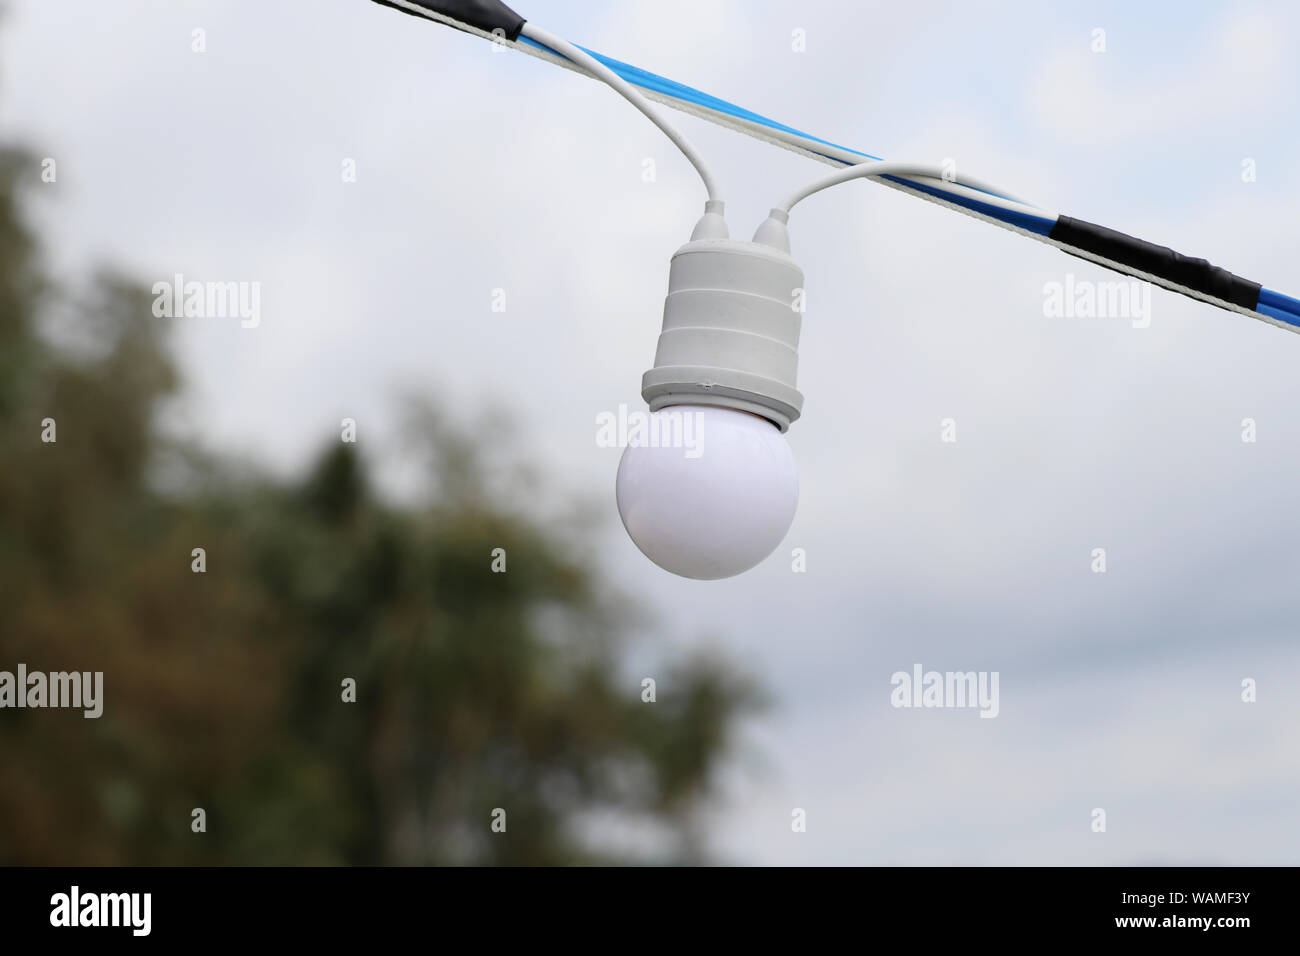 Round light bulb with a sky backdrop. White light bulb with blurred background. Stock Photo